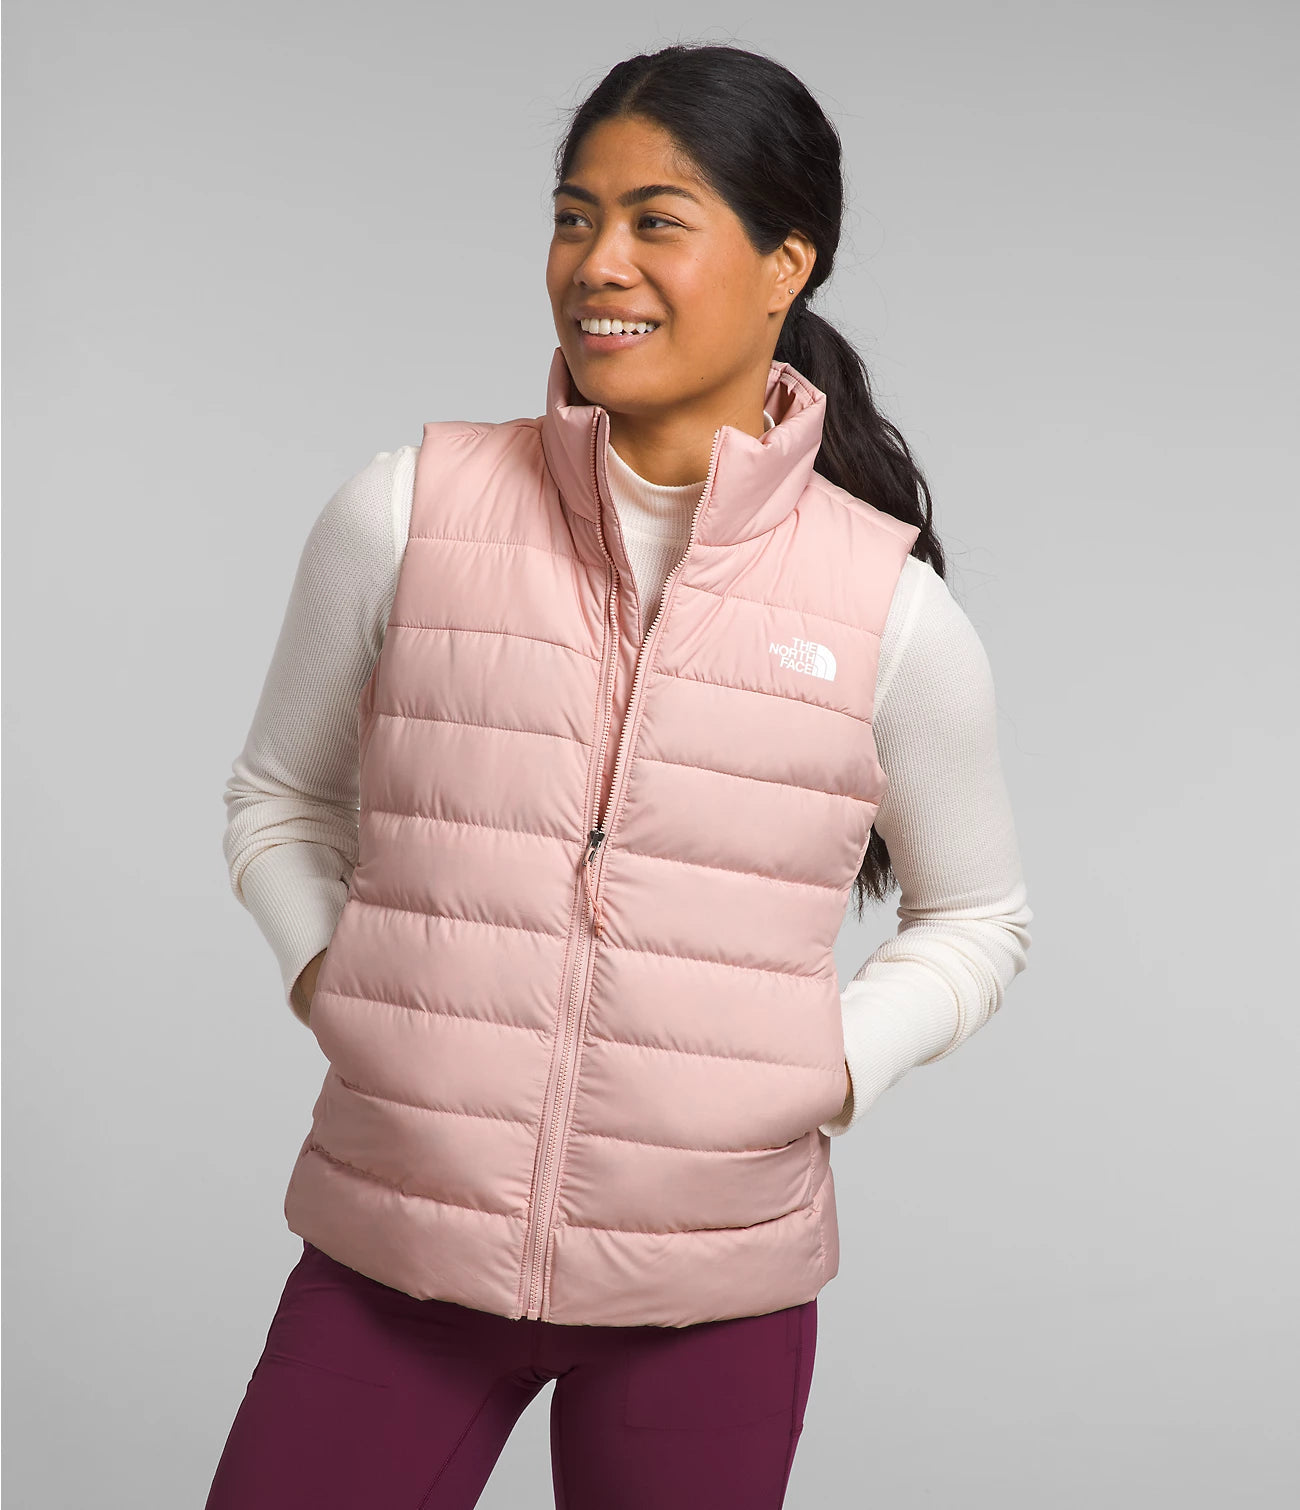 THE NORTH FACE Women's Outerwear PINK MOSS / S North Face Women’s Aconcagua 3 Vest || David's Clothing NF0A84JPLK6